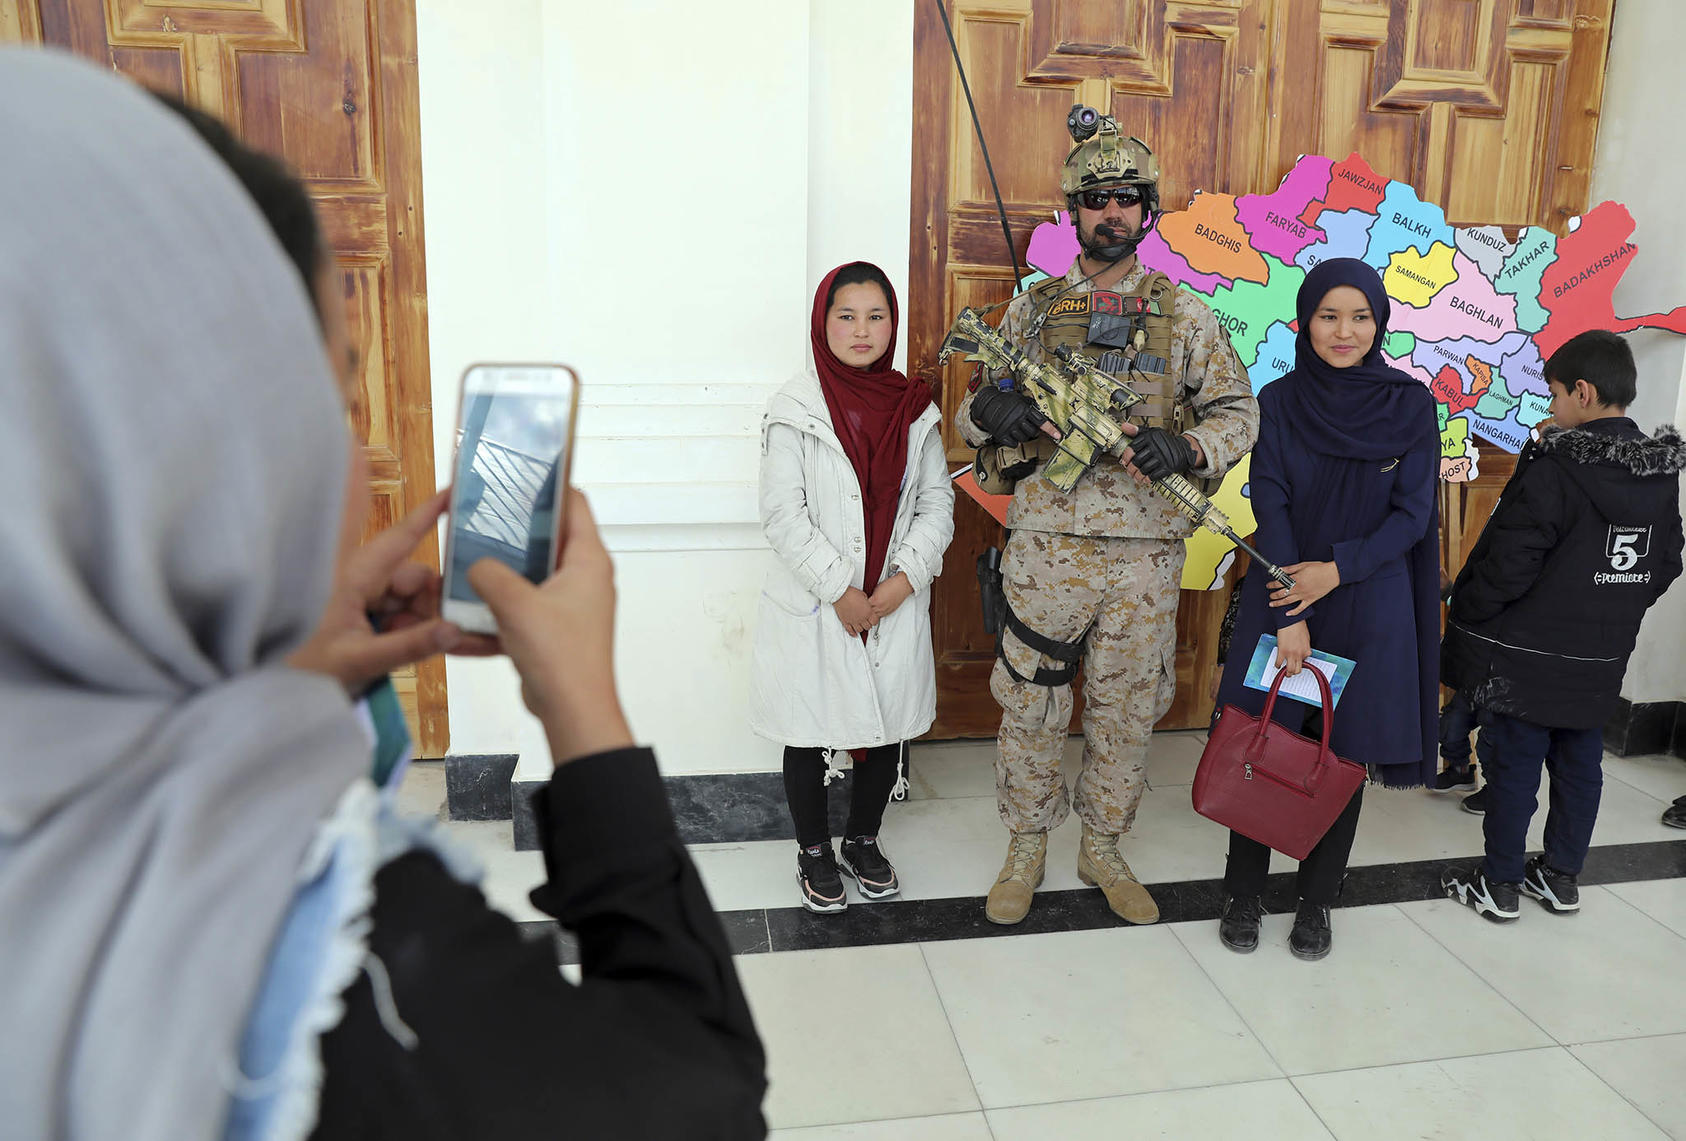 People take a picture with a soldier at the Afghan Security Forces Exhibition in Kabul, Afghanistan, on March 3, 2021. (Rahmat Gul/AP)